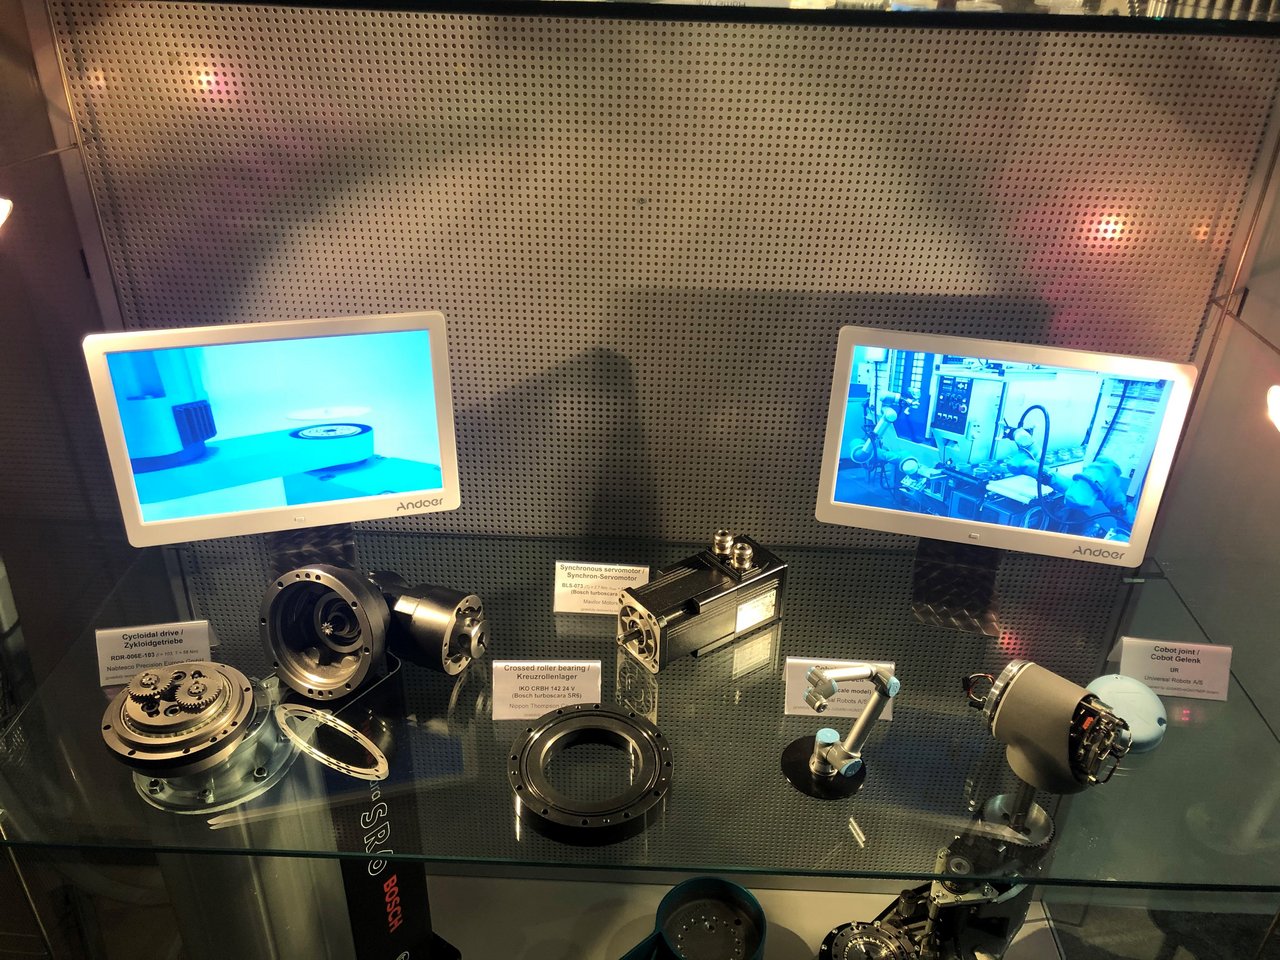 Middle drawer of the glass box with the exhibition of drive systems of robots